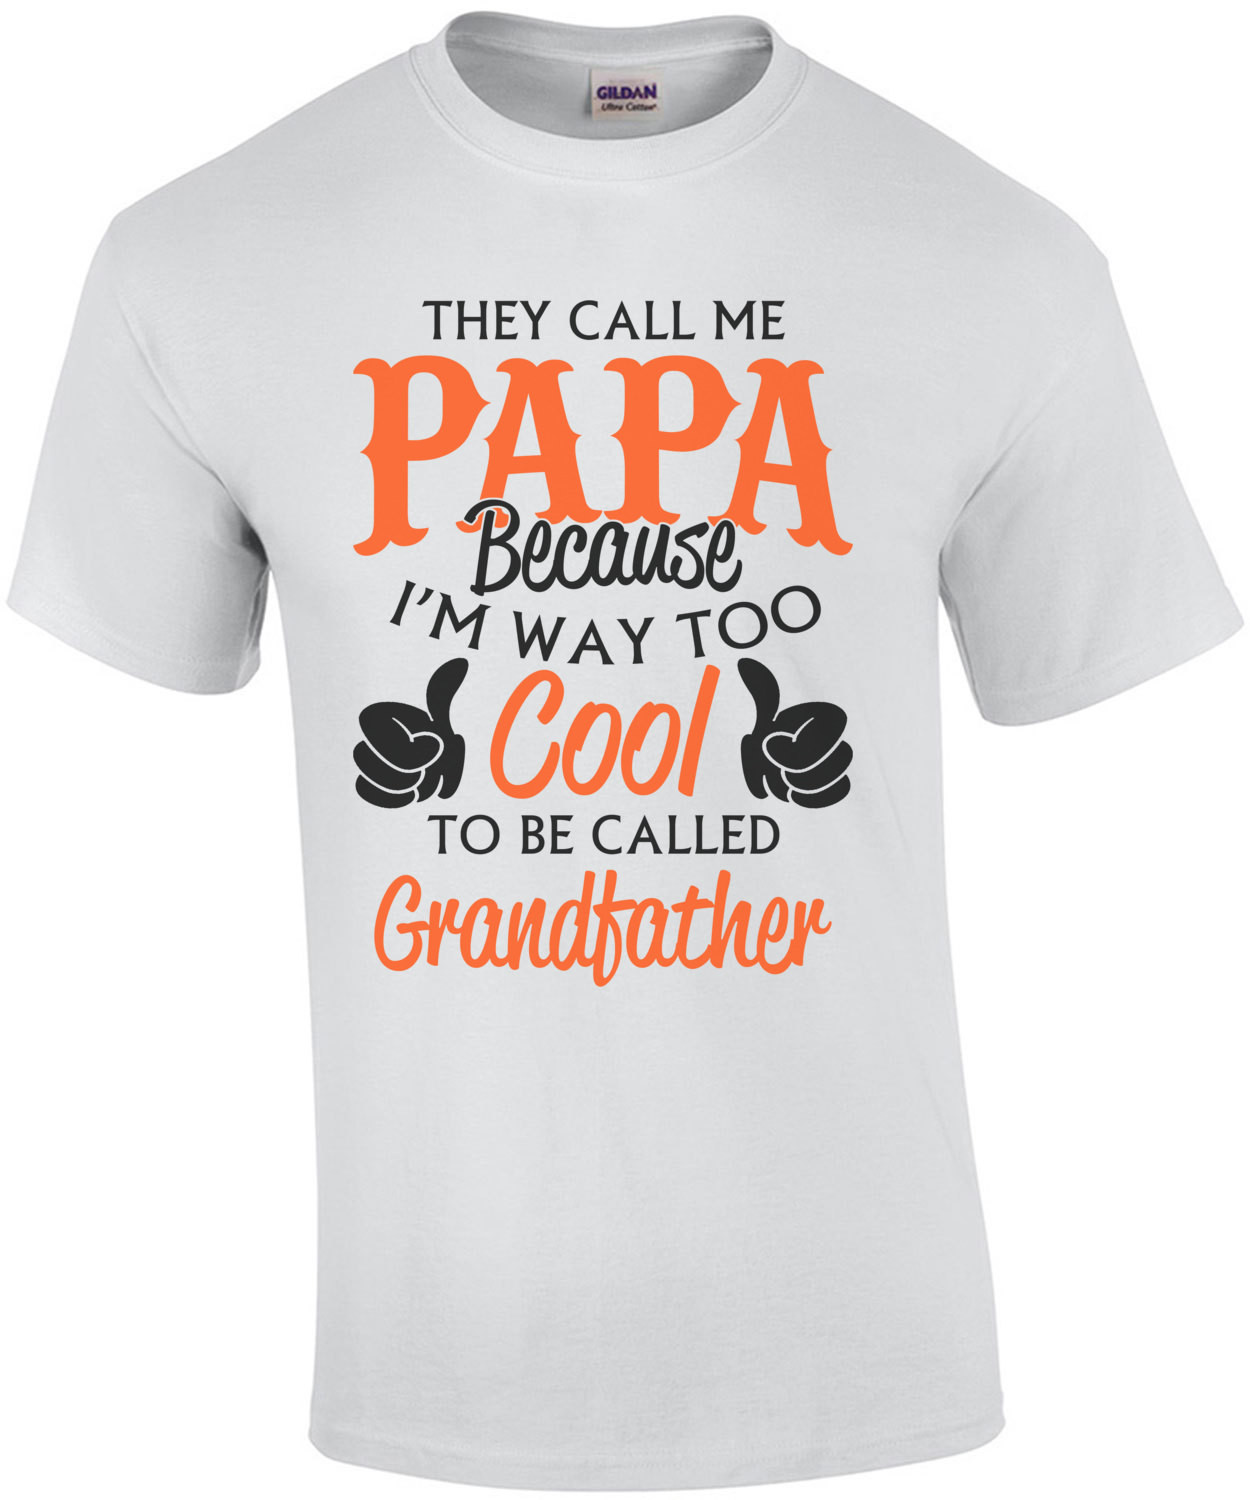 They Call Me Papa Because I'm Way Too Cool To Be Called Grandfather T-Shirt